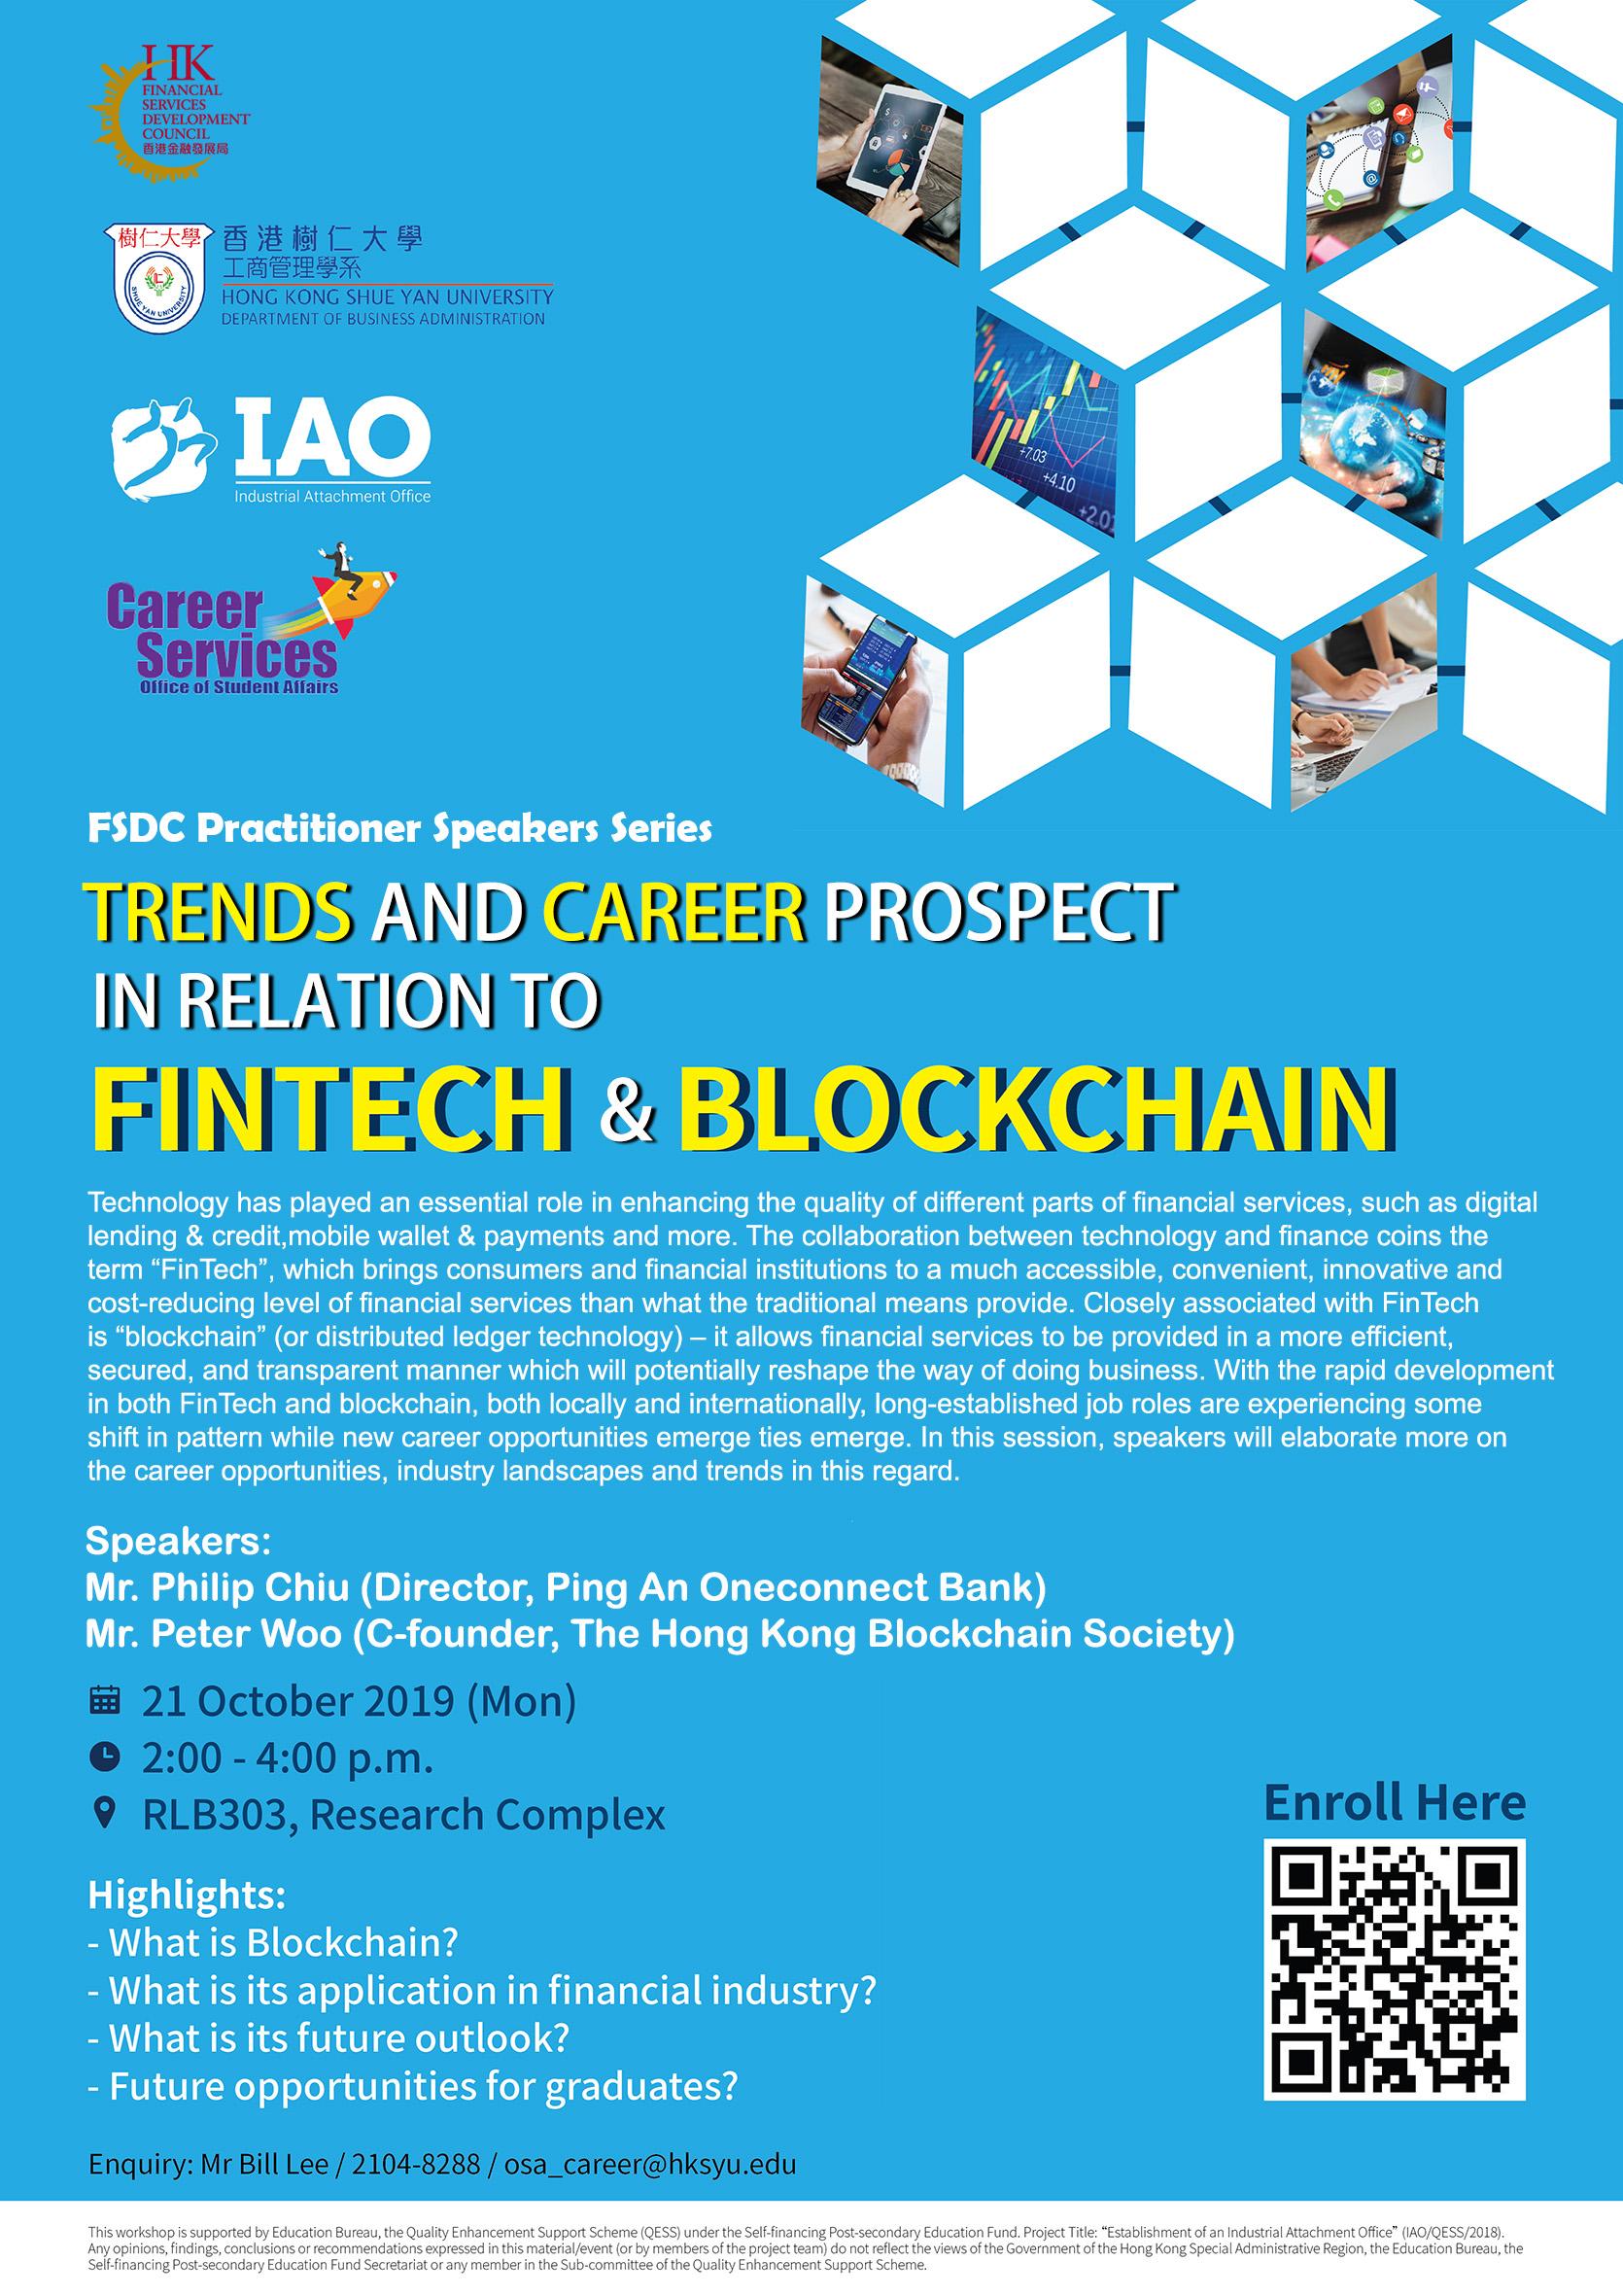 Trends and Career Prospect in relation to FinTech and Blockchain